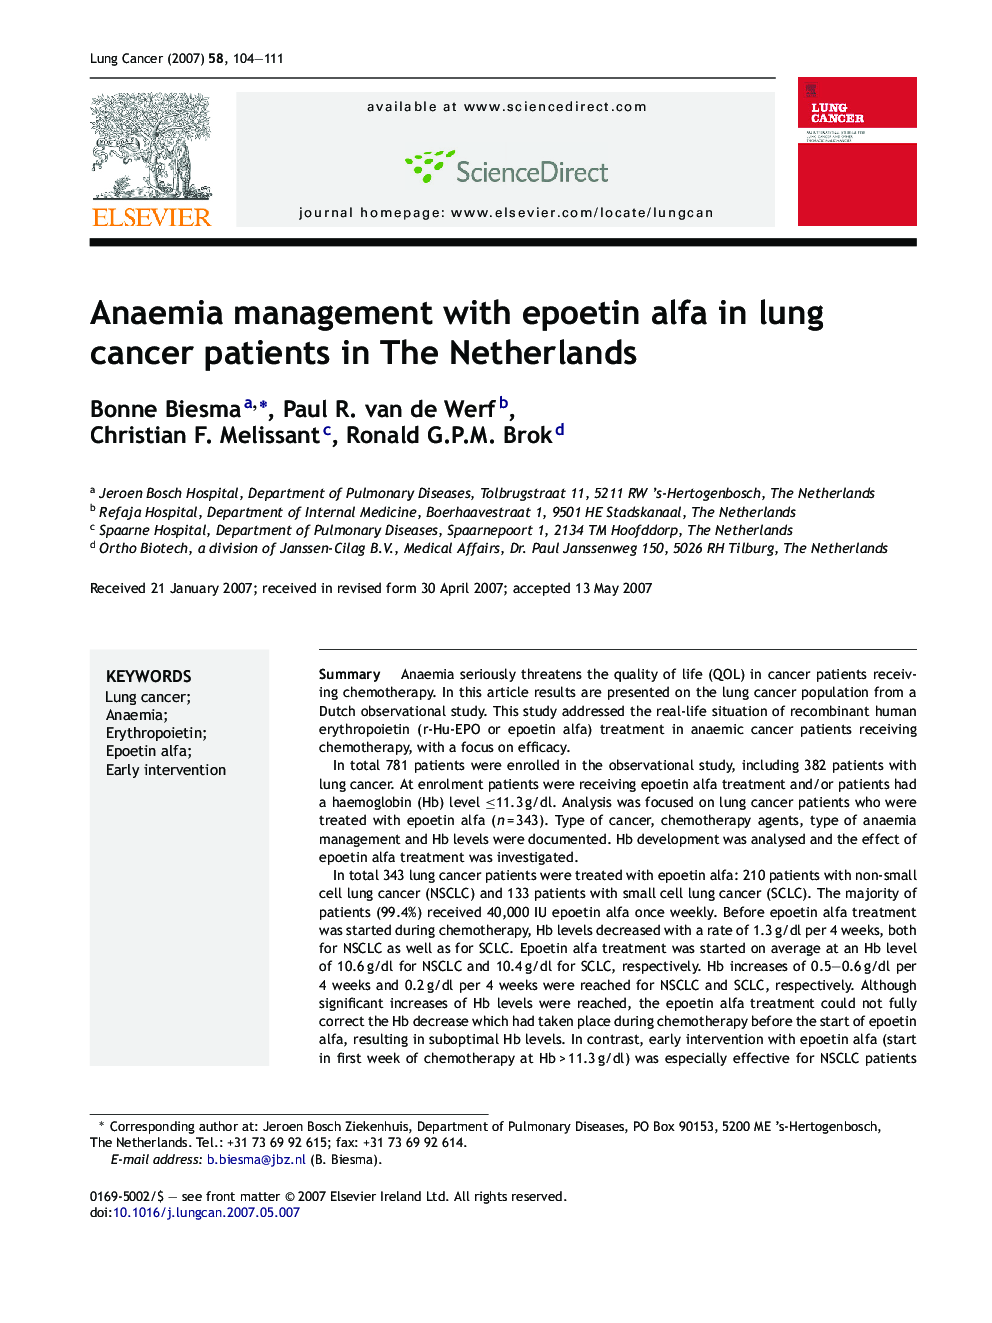 Anaemia management with epoetin alfa in lung cancer patients in The Netherlands